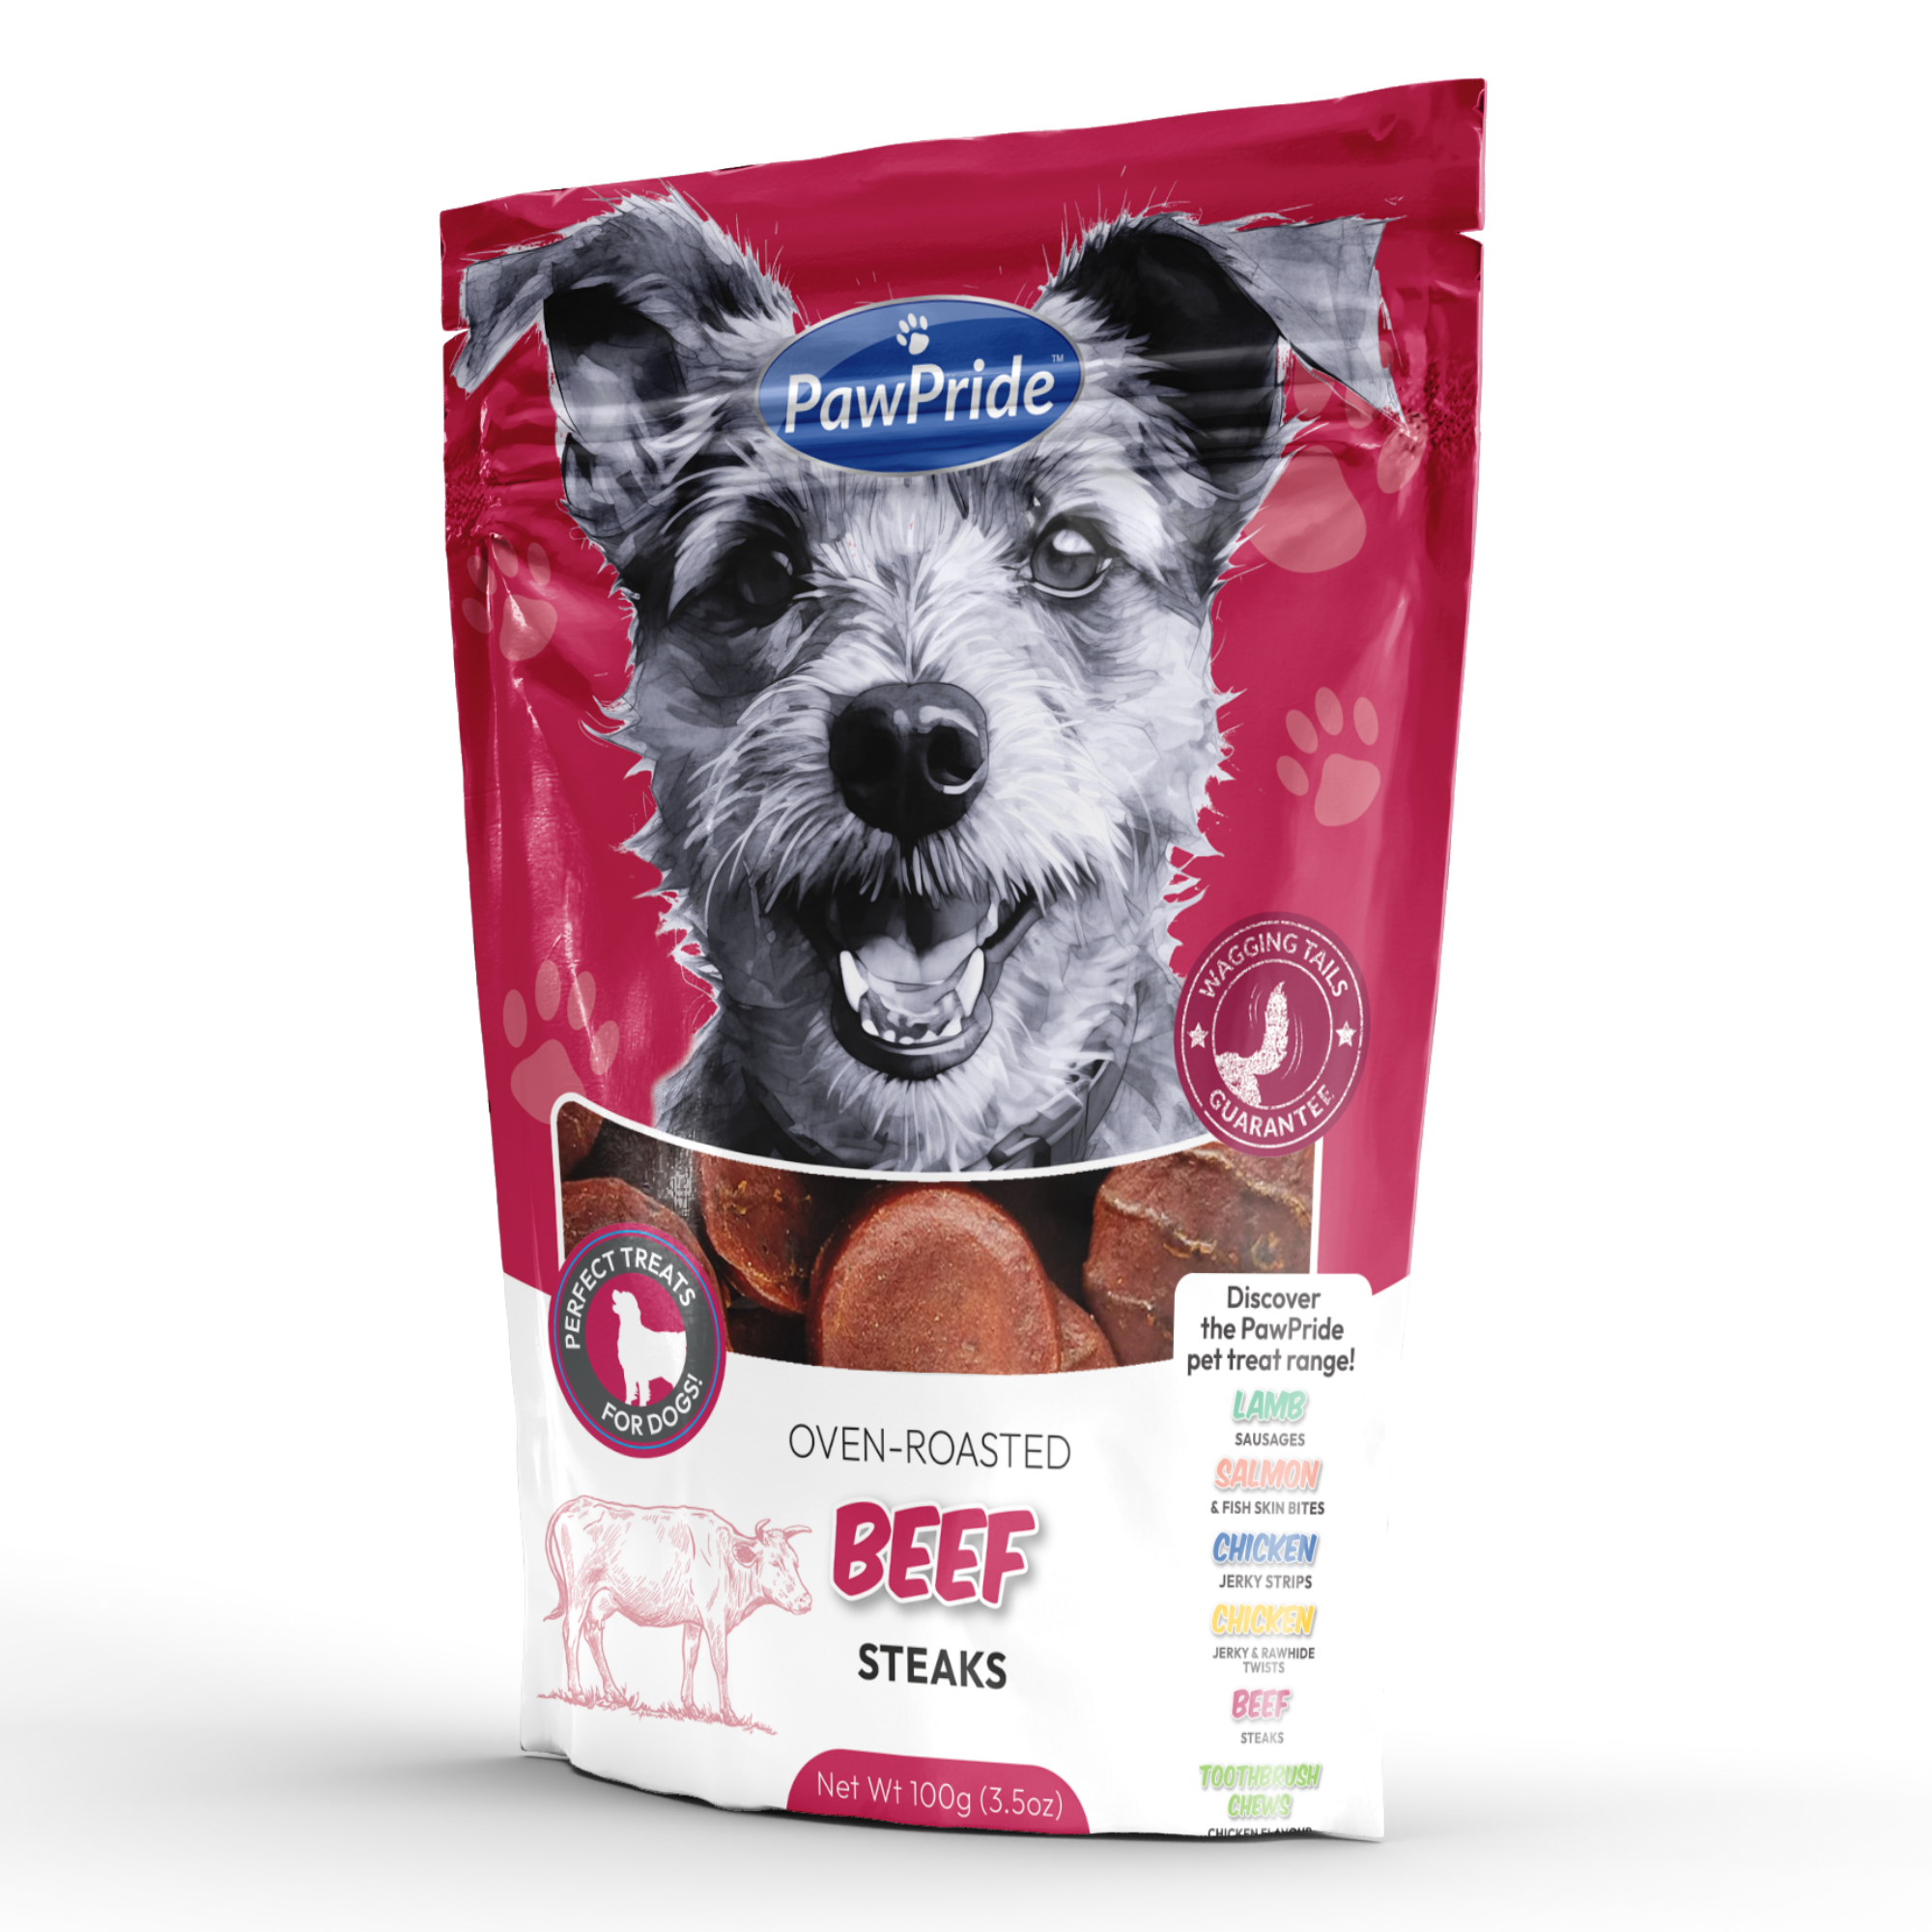 Beef Steaks - Dog Treats from PawPride